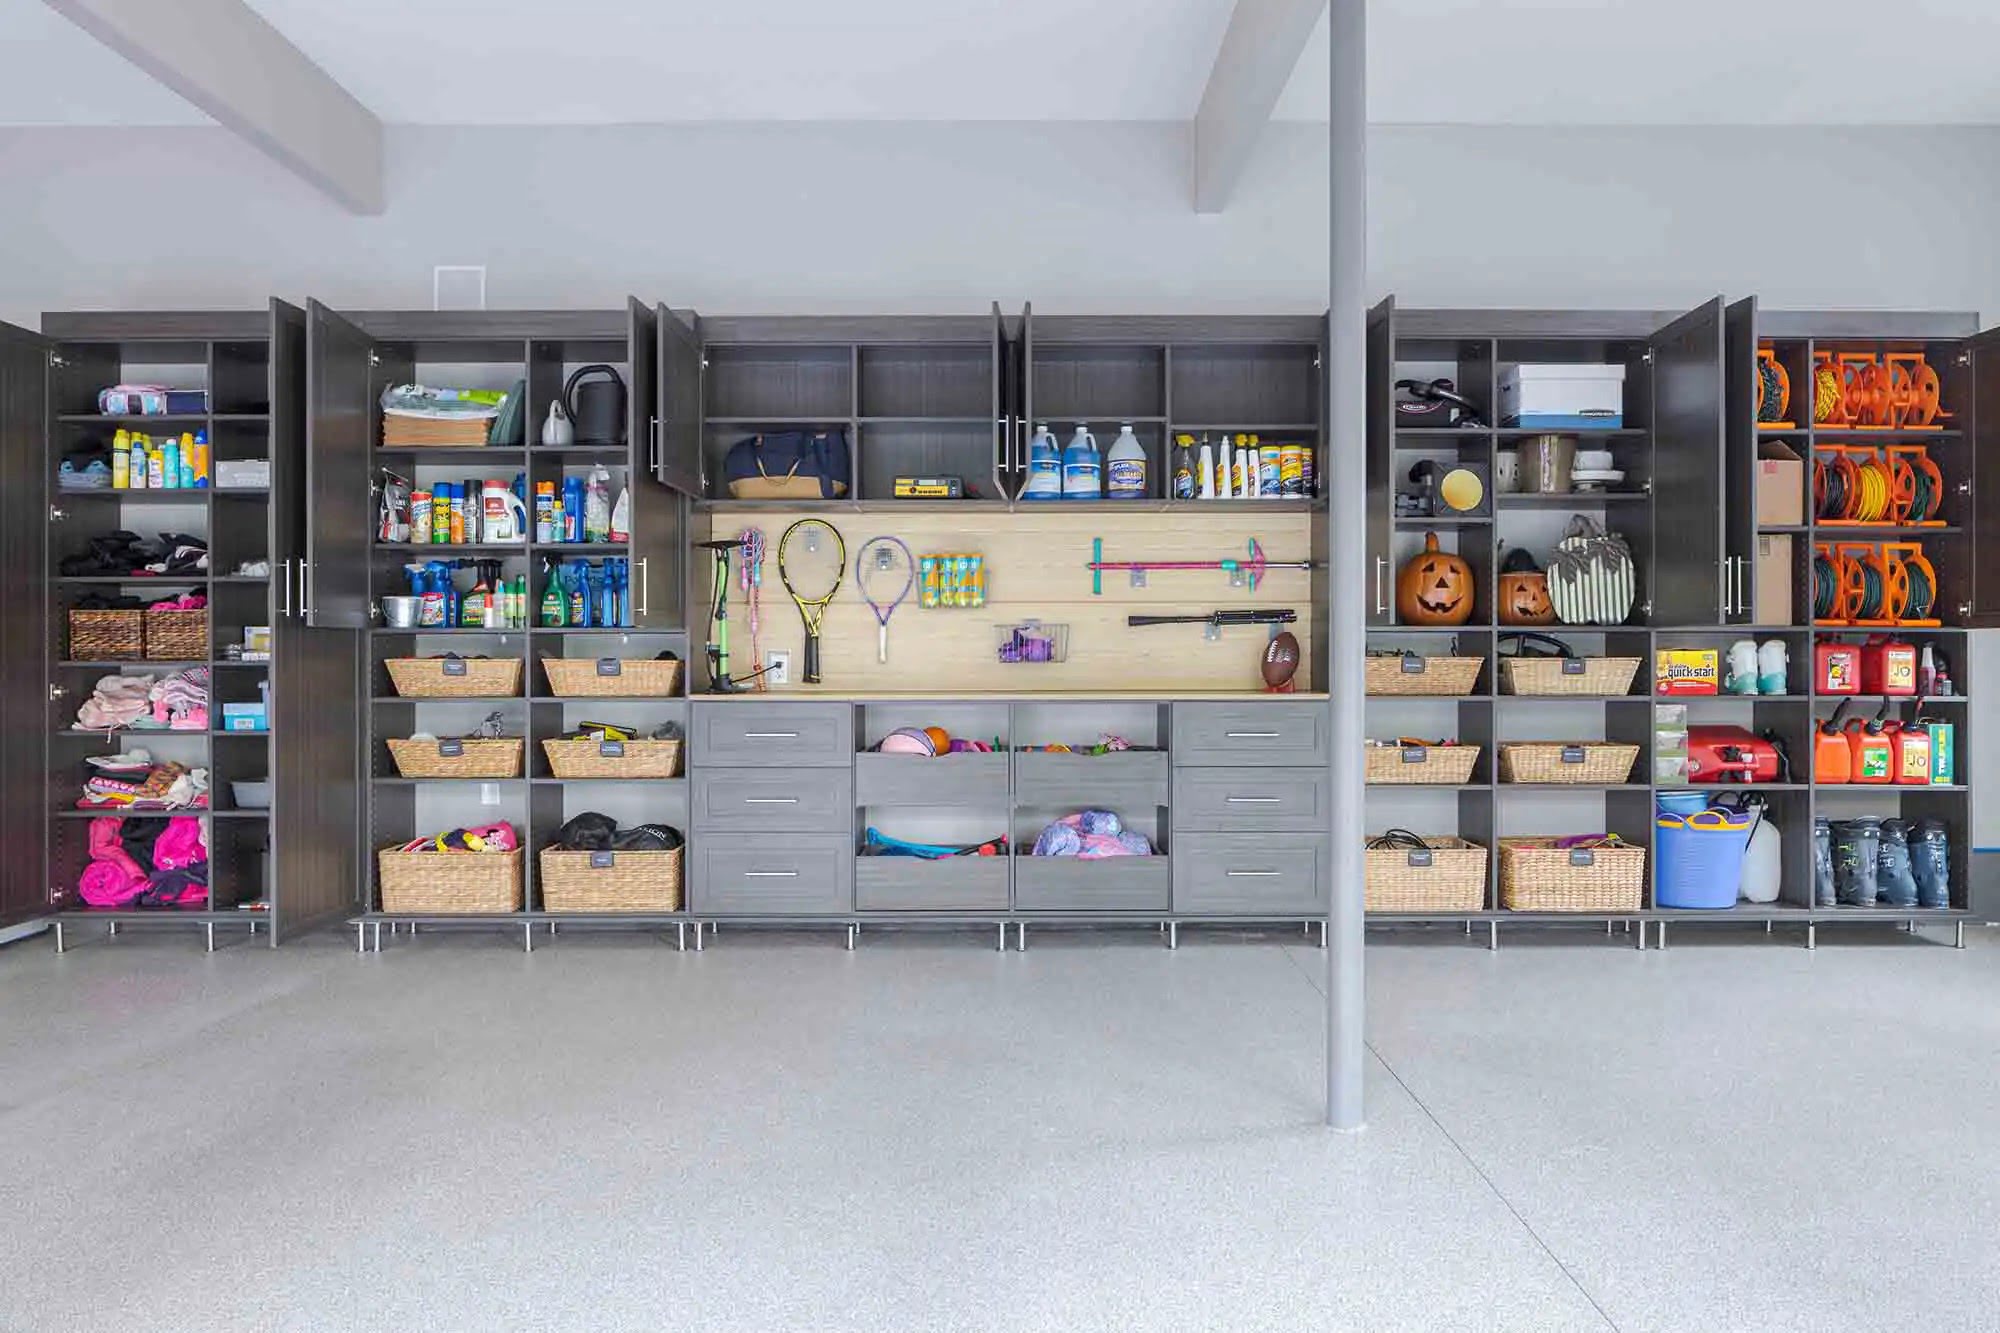 Review: Garage Storage System – The Perfect Solution for Organized Spaces